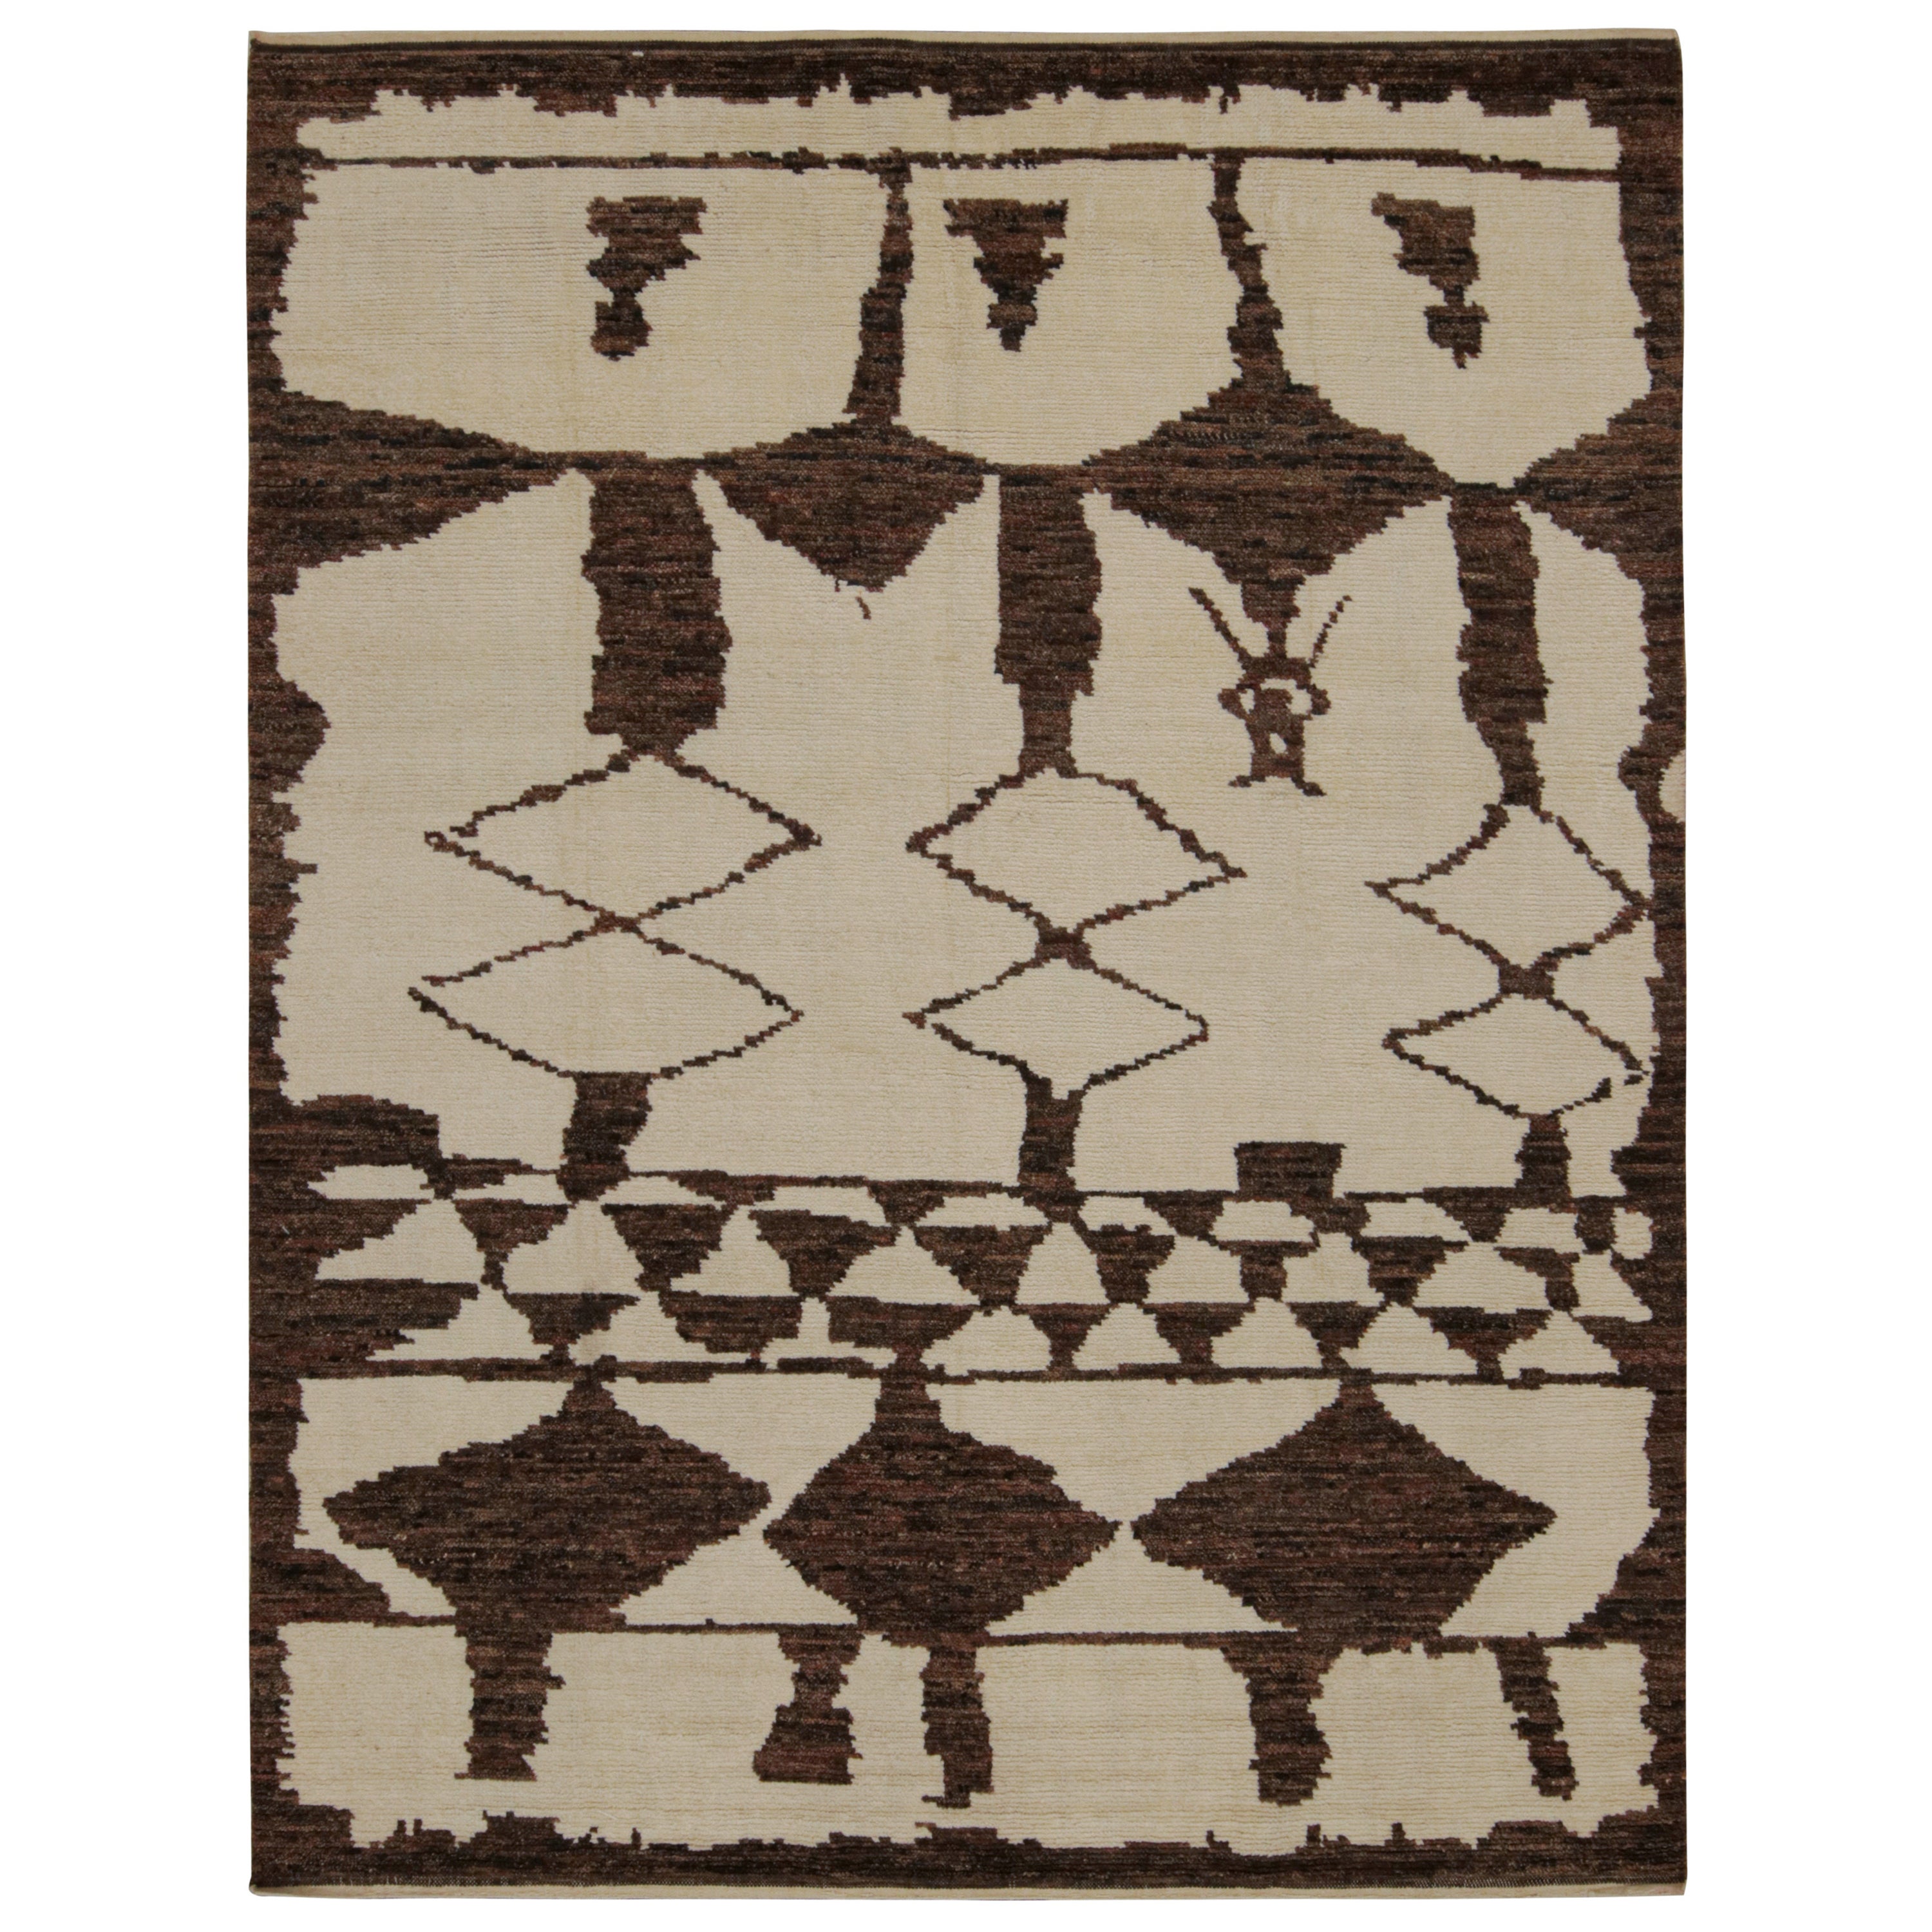 Rug & Kilim’s Moroccan Style Rug in Beige and Brown Geometric Patterns